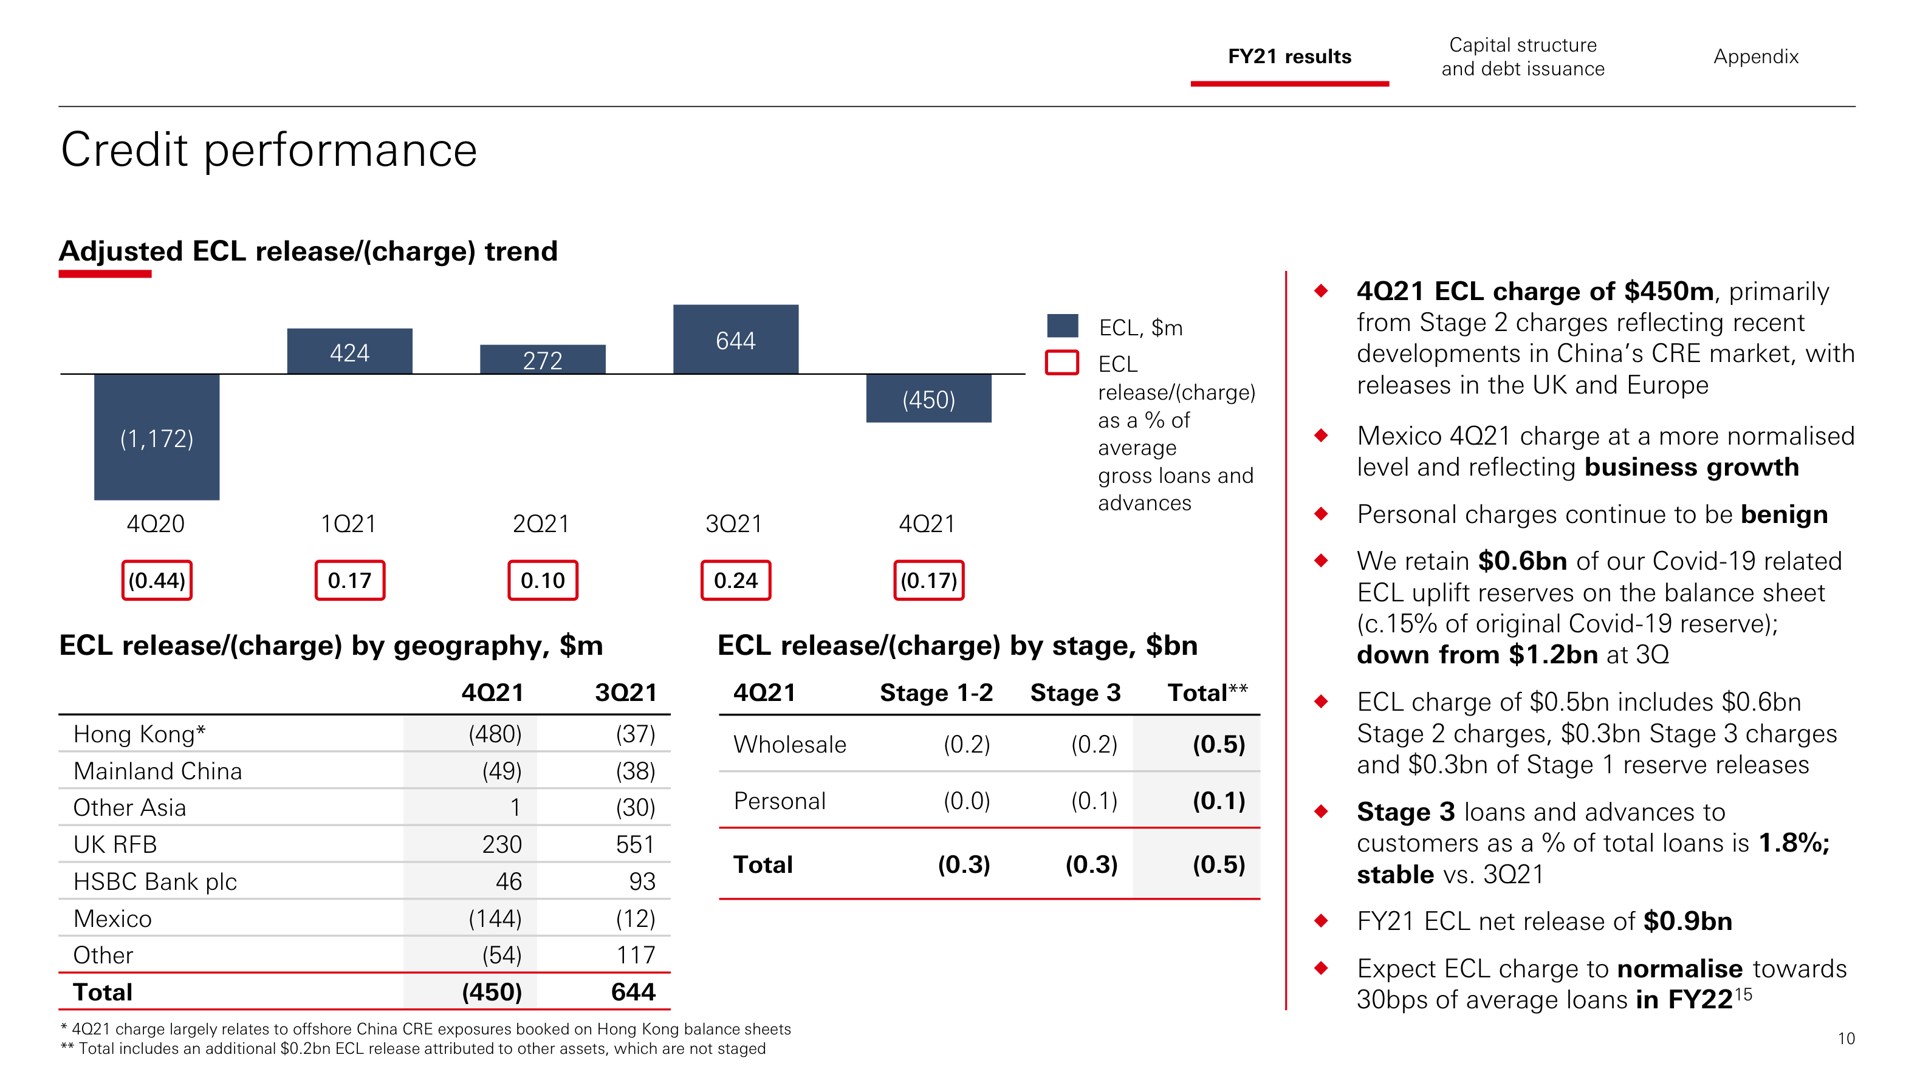 credit performance adjusted release charge trend release charge by geography release charge by stage total | HSBC